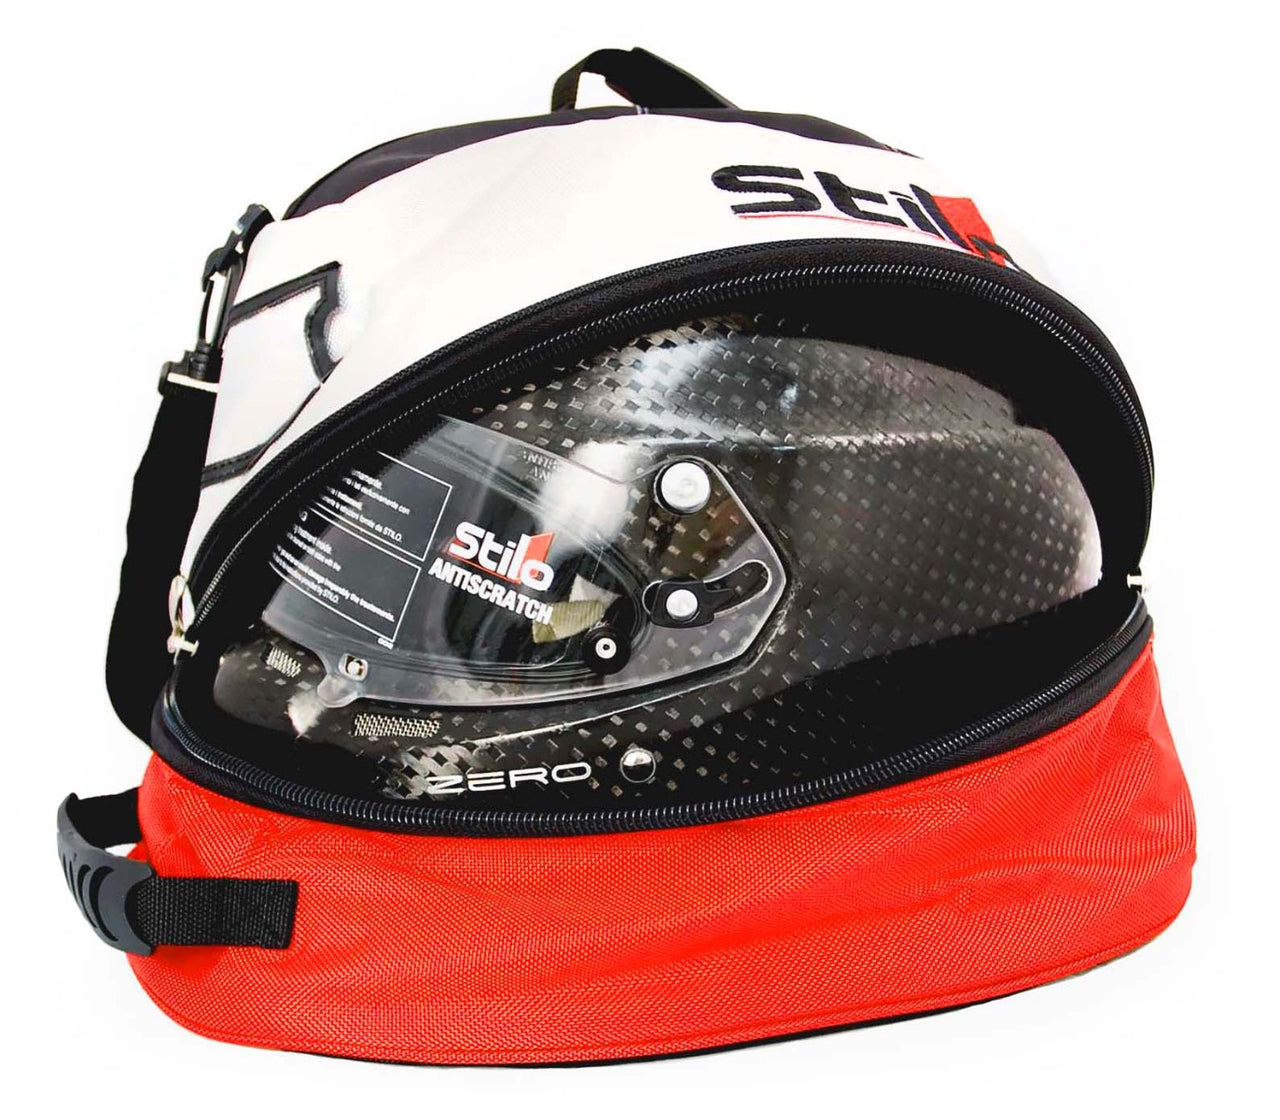 The Stilo Helmet Bag Plus HANS has a soft interior to keep your helmet from being scratched.